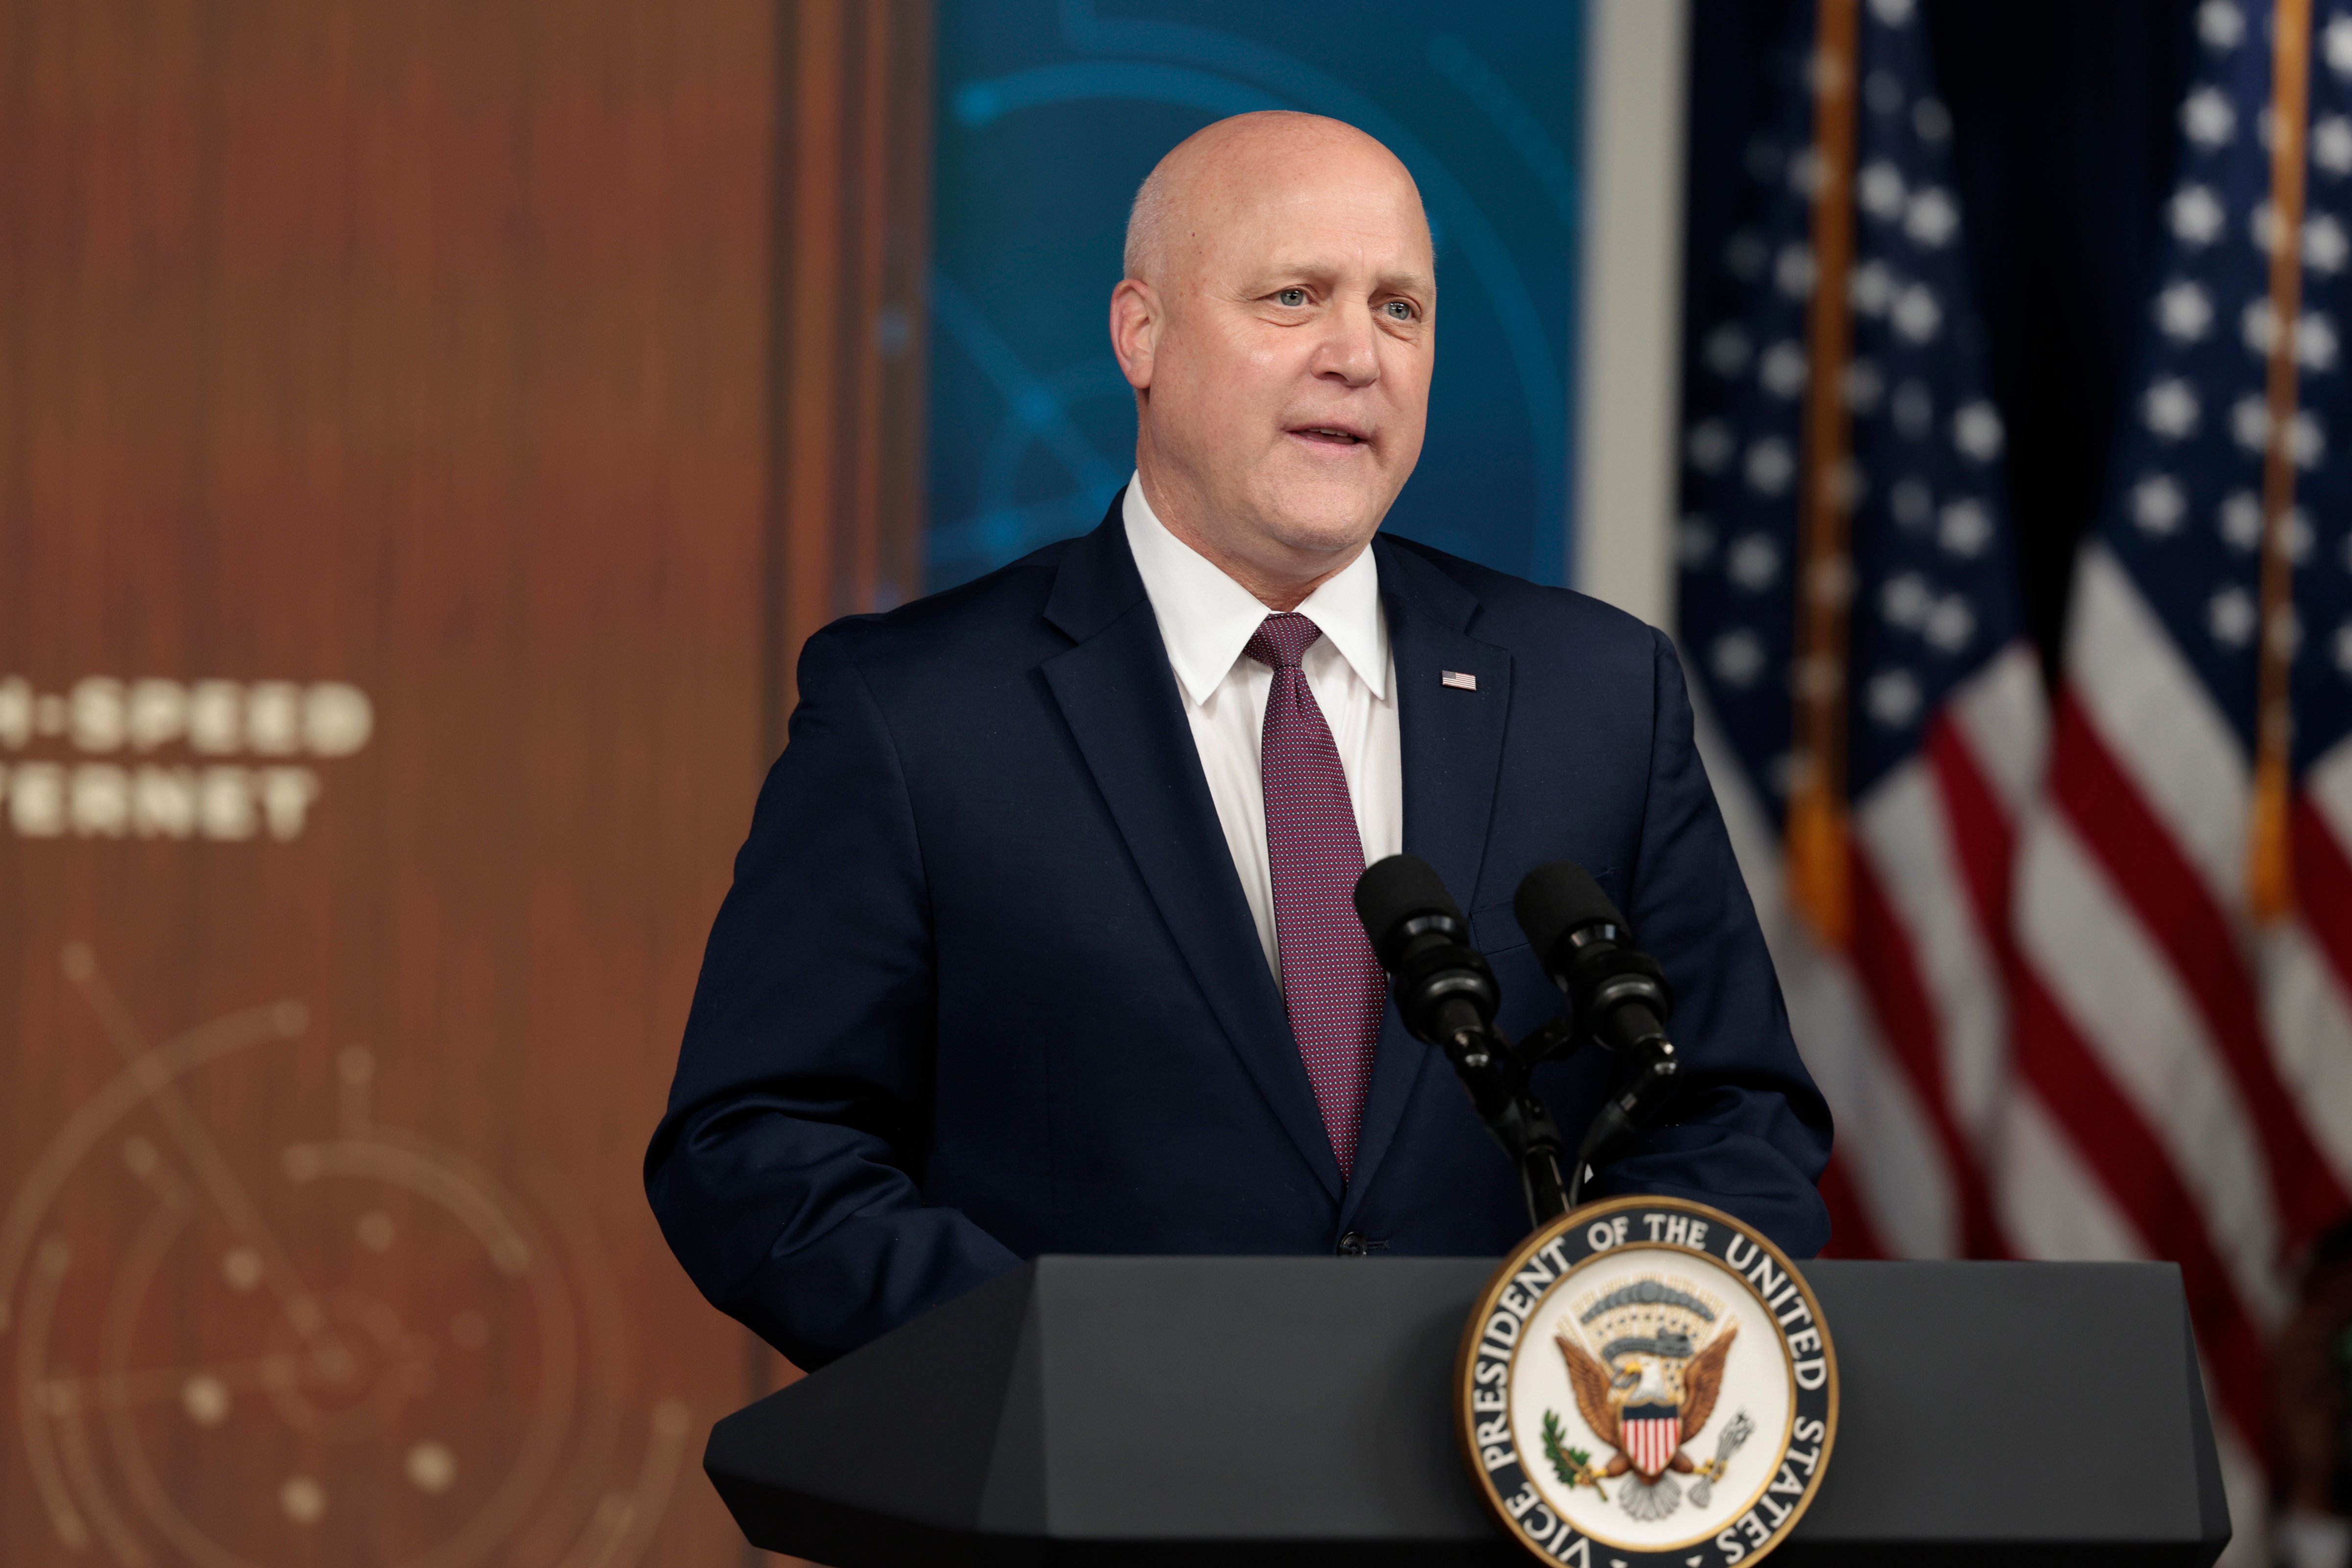 White House Infrastructure Act Implementation Coordinator Mitch Landrieu delivers remarks on the Biden administration’s Affordable Connectivity Program at the South Court Auditorium at Eisenhower Executive Office Building on February 14, 2022. (Anna Moneymaker–Getty Images)